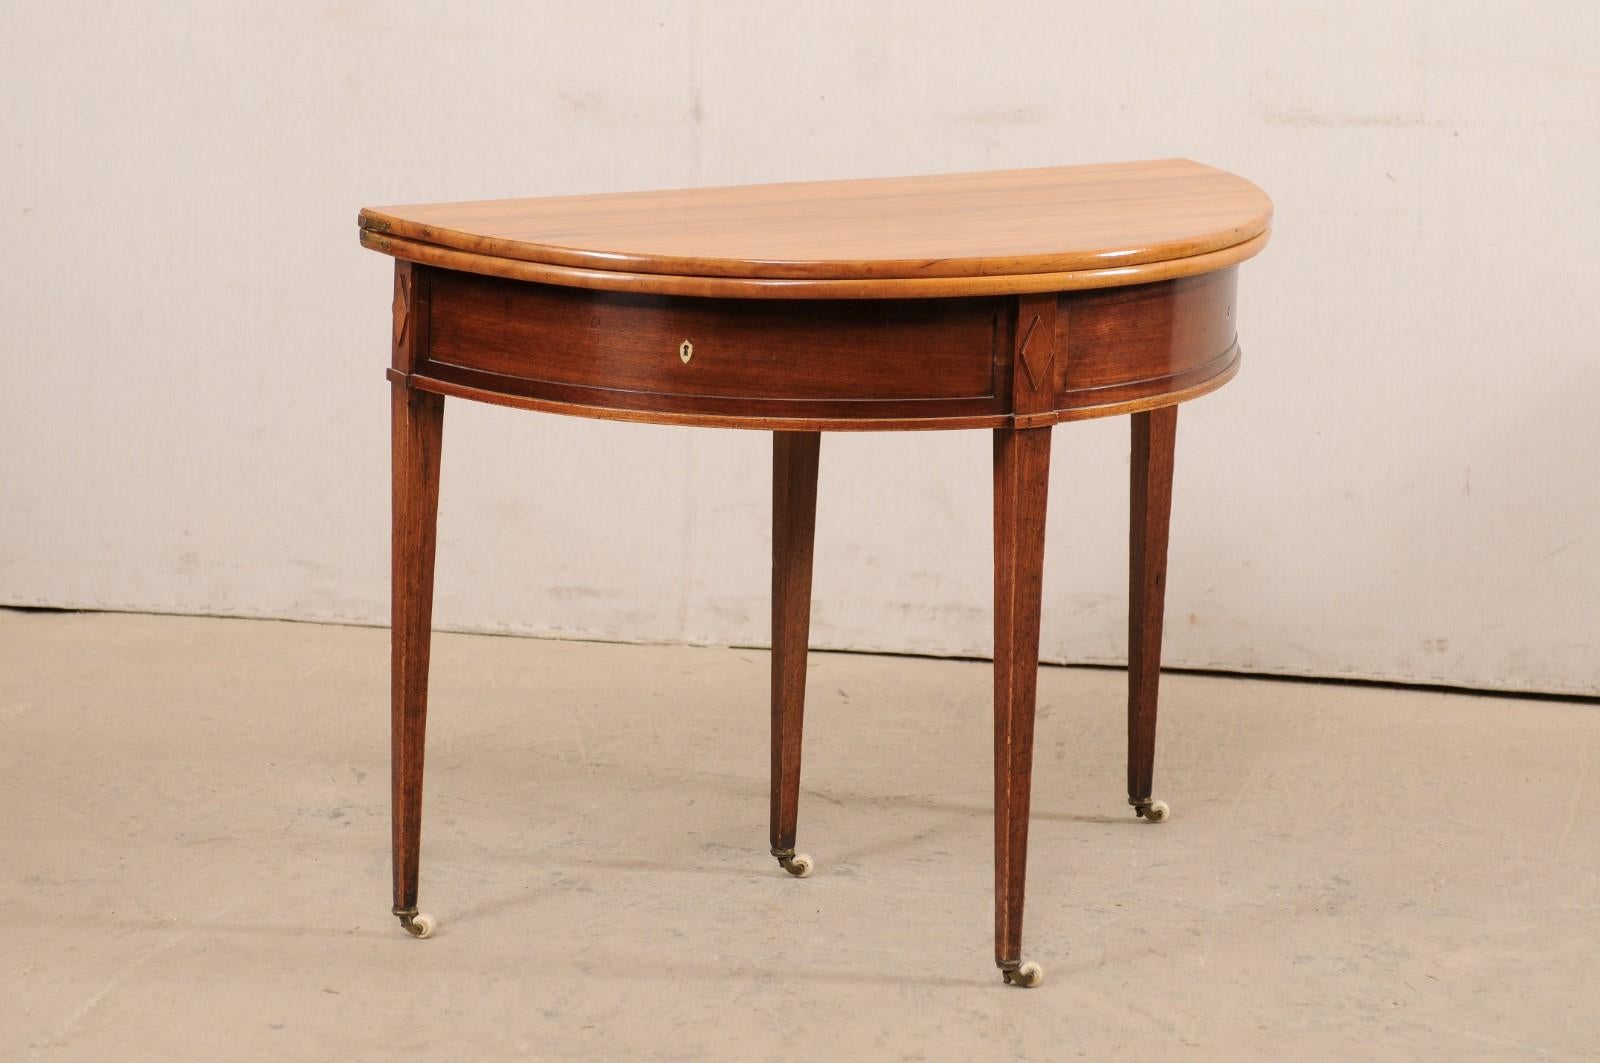 A French demi-lune wood table, which converts to a round table, from the early 19th century. This antique table from France features a half moon top over a rounded apron. The skirt is clean in design, with raised carved diamond accents above each of